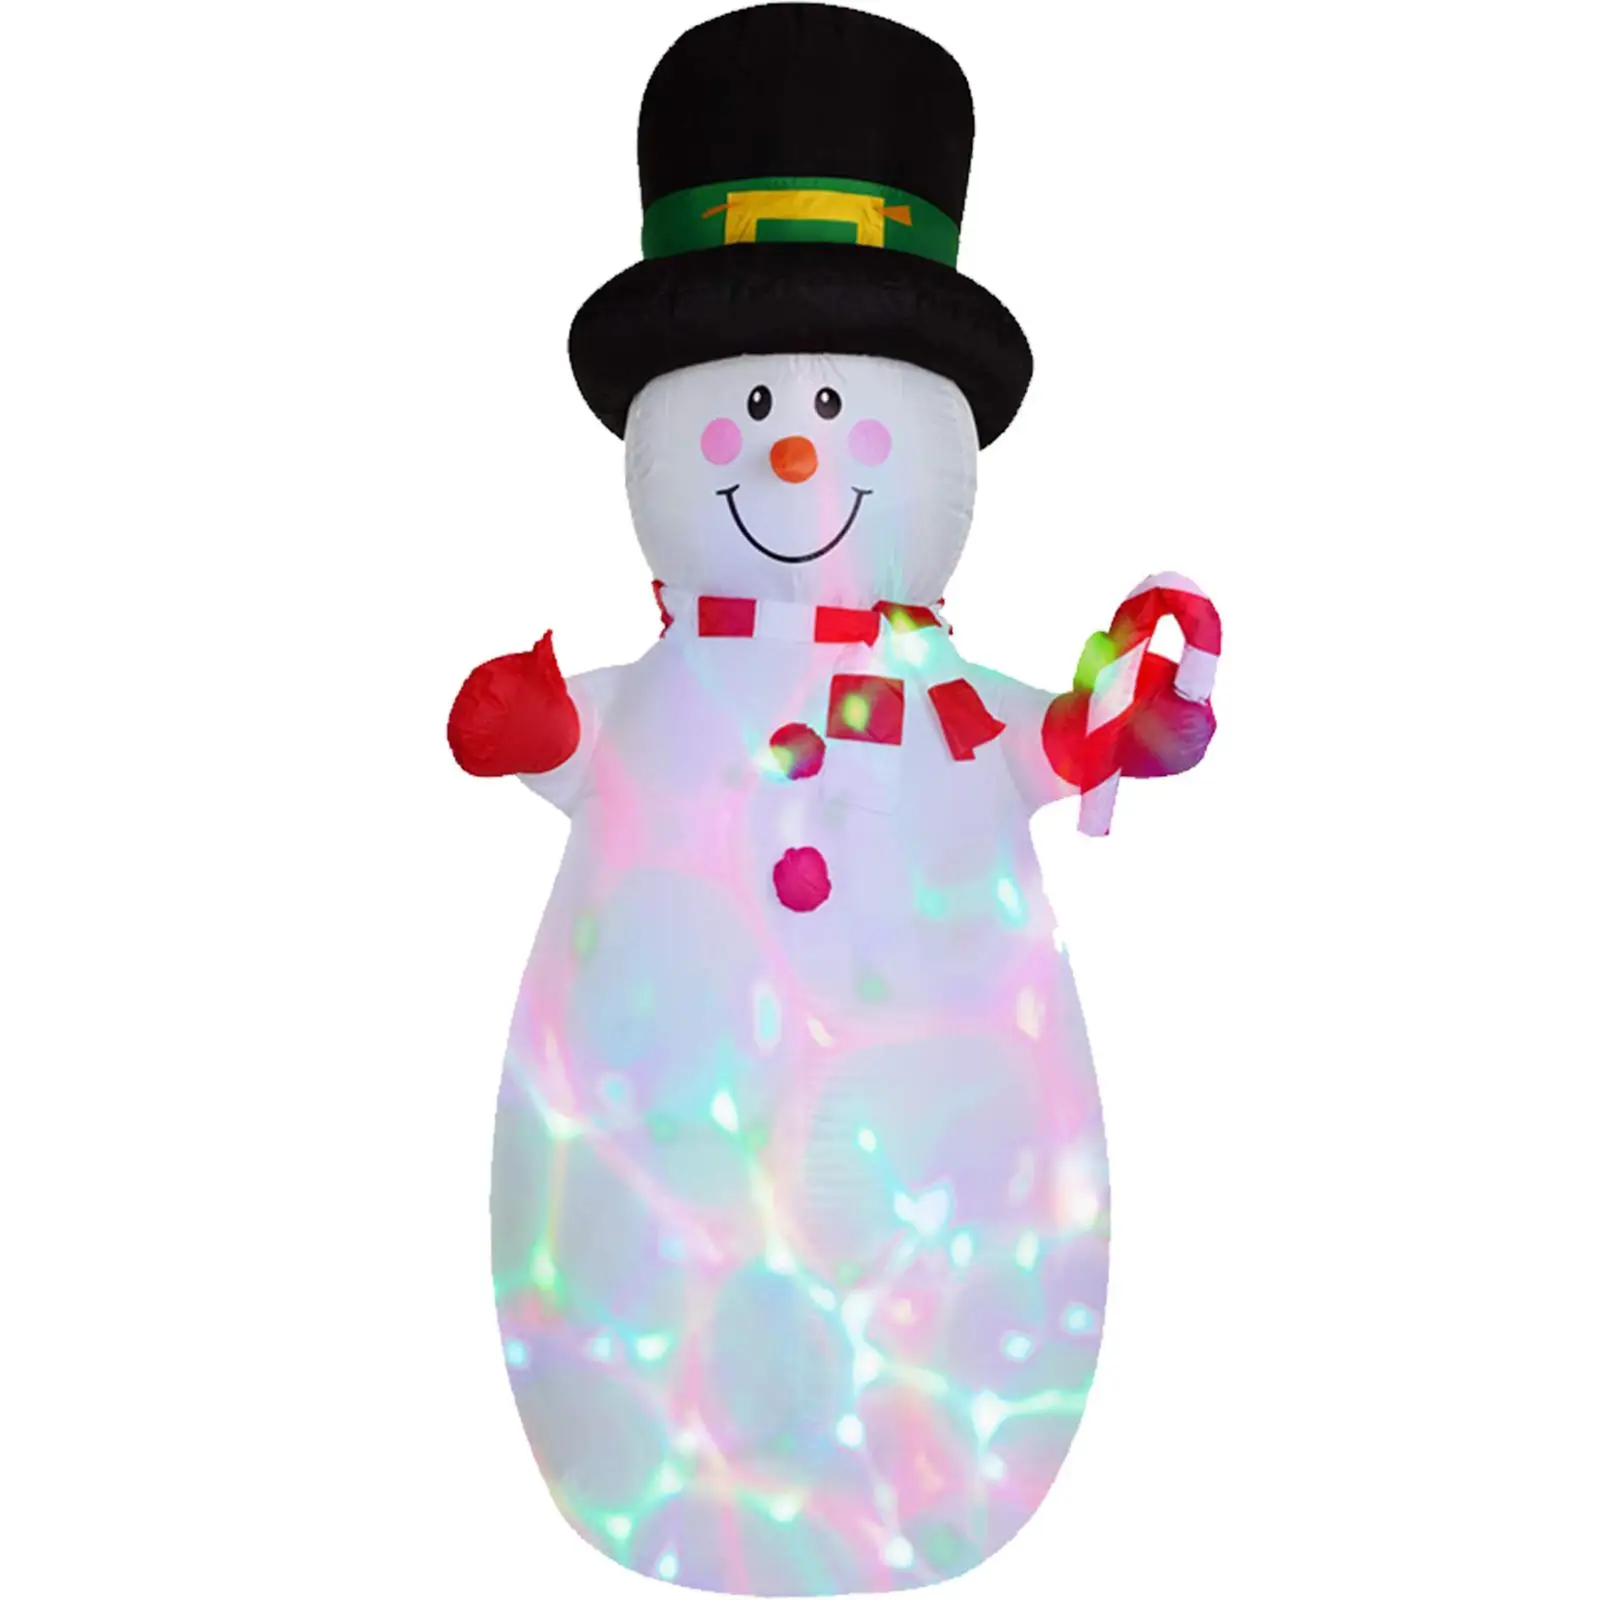 6ft Christmas Inflatable Snowman with Lights Holiday Inflatable Snowman Ornament for Festival Outdoor Patio Home Party